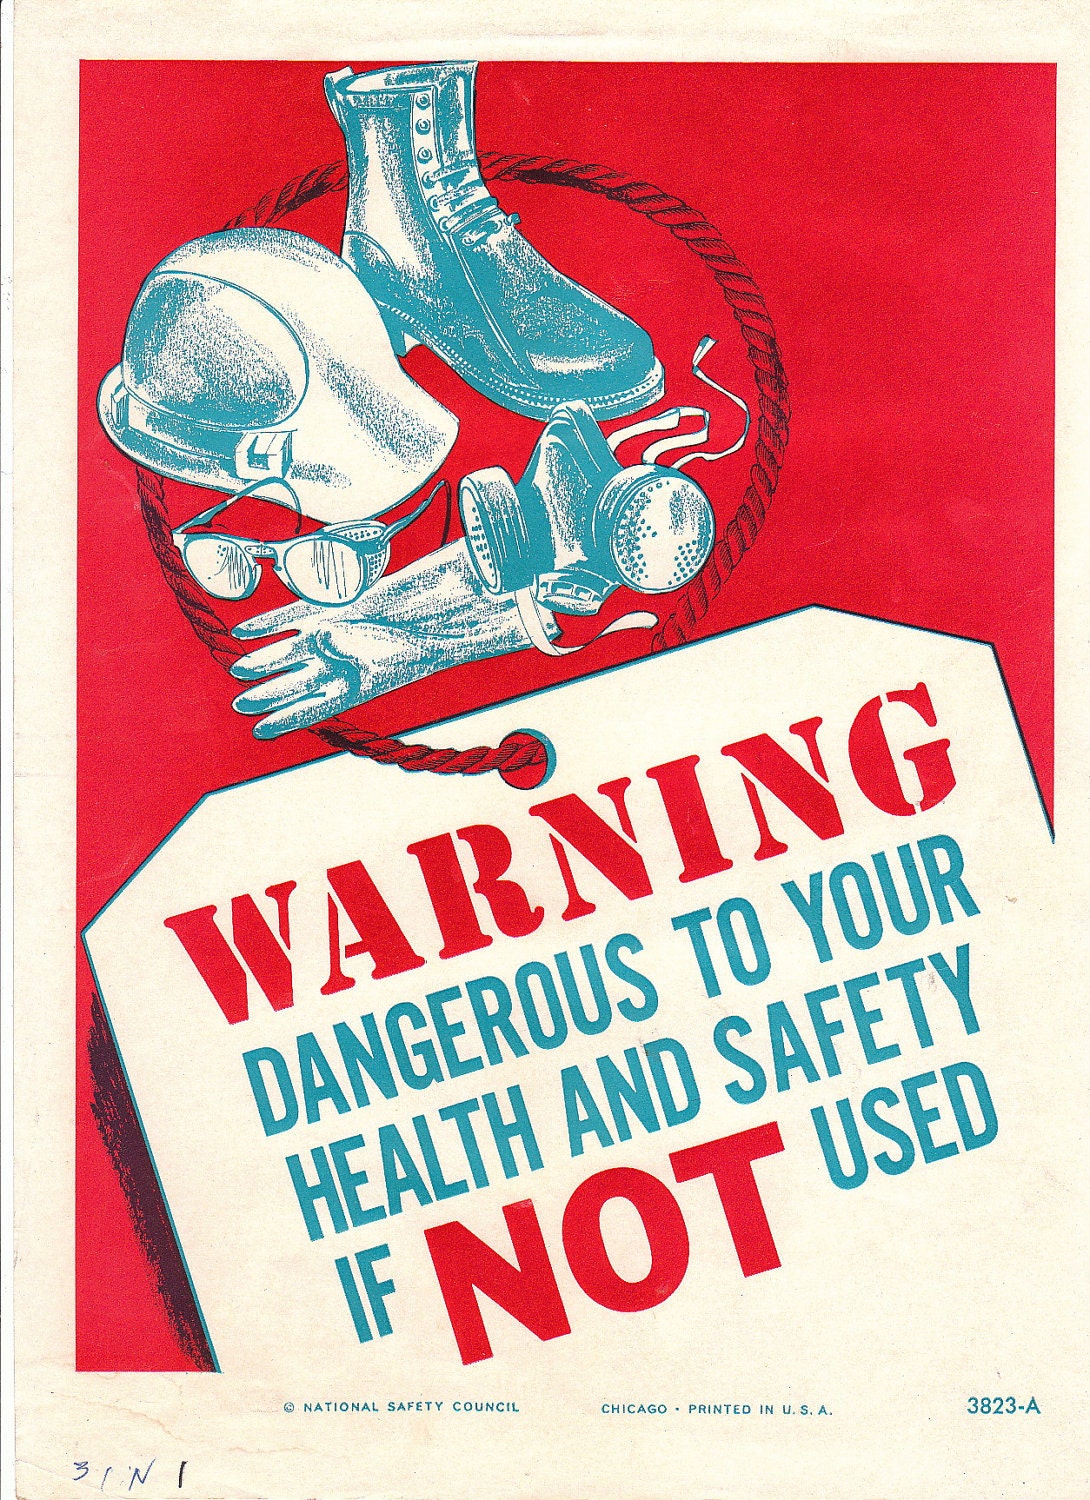 Vintage National Safety Poster - Warning Dangerous to Health and Safety